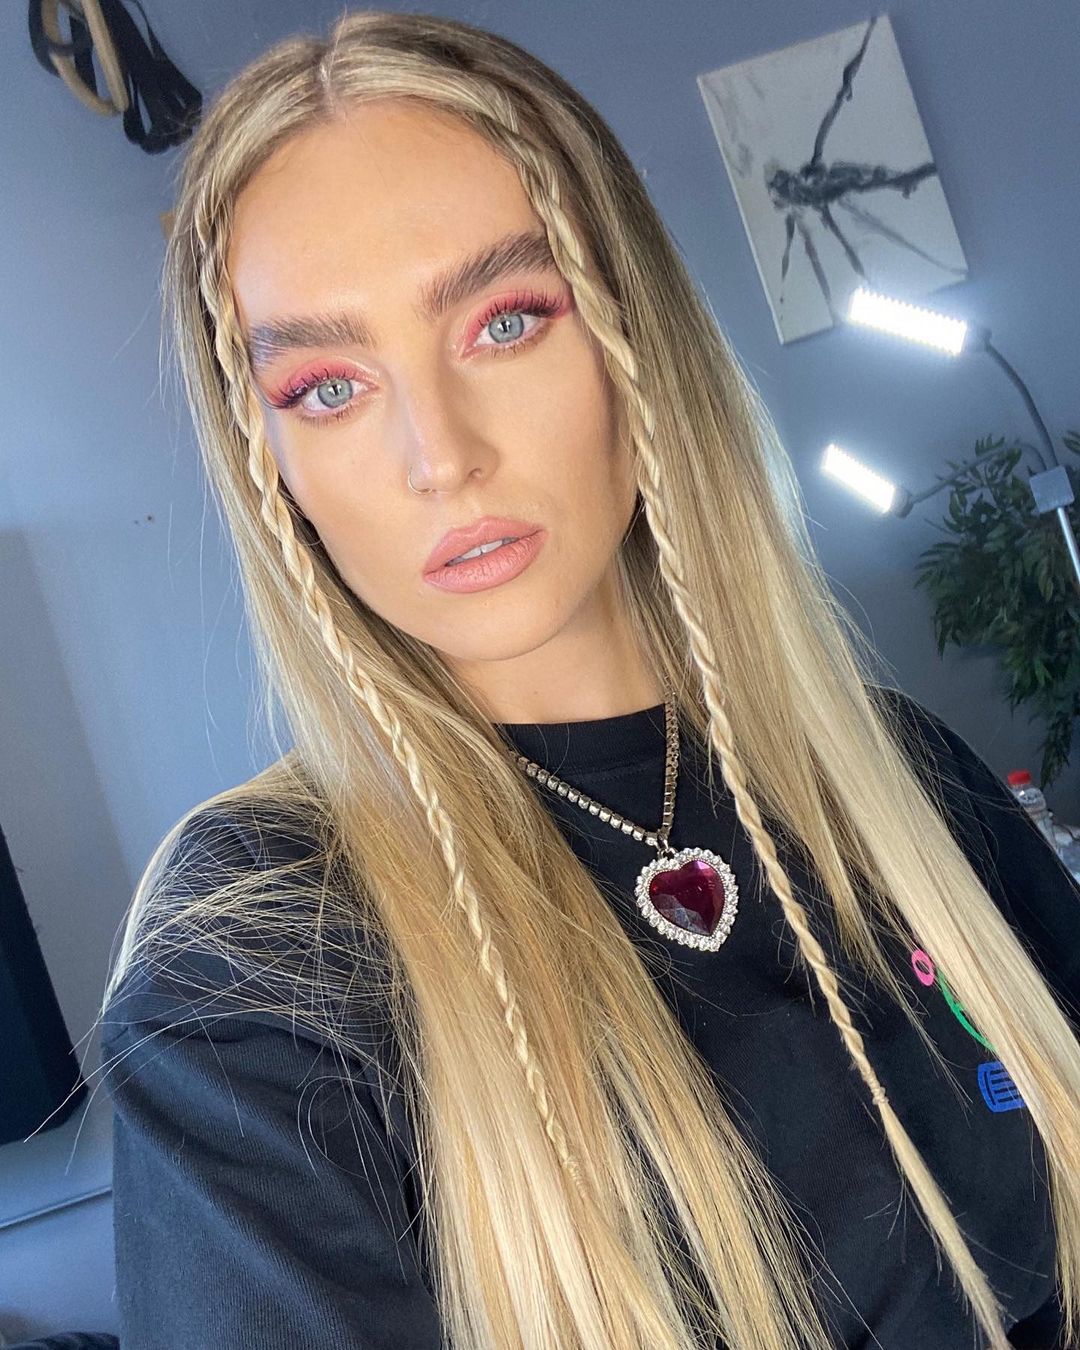 Perrie edwards 16 hottest pics, perrie edwards 16 instagram